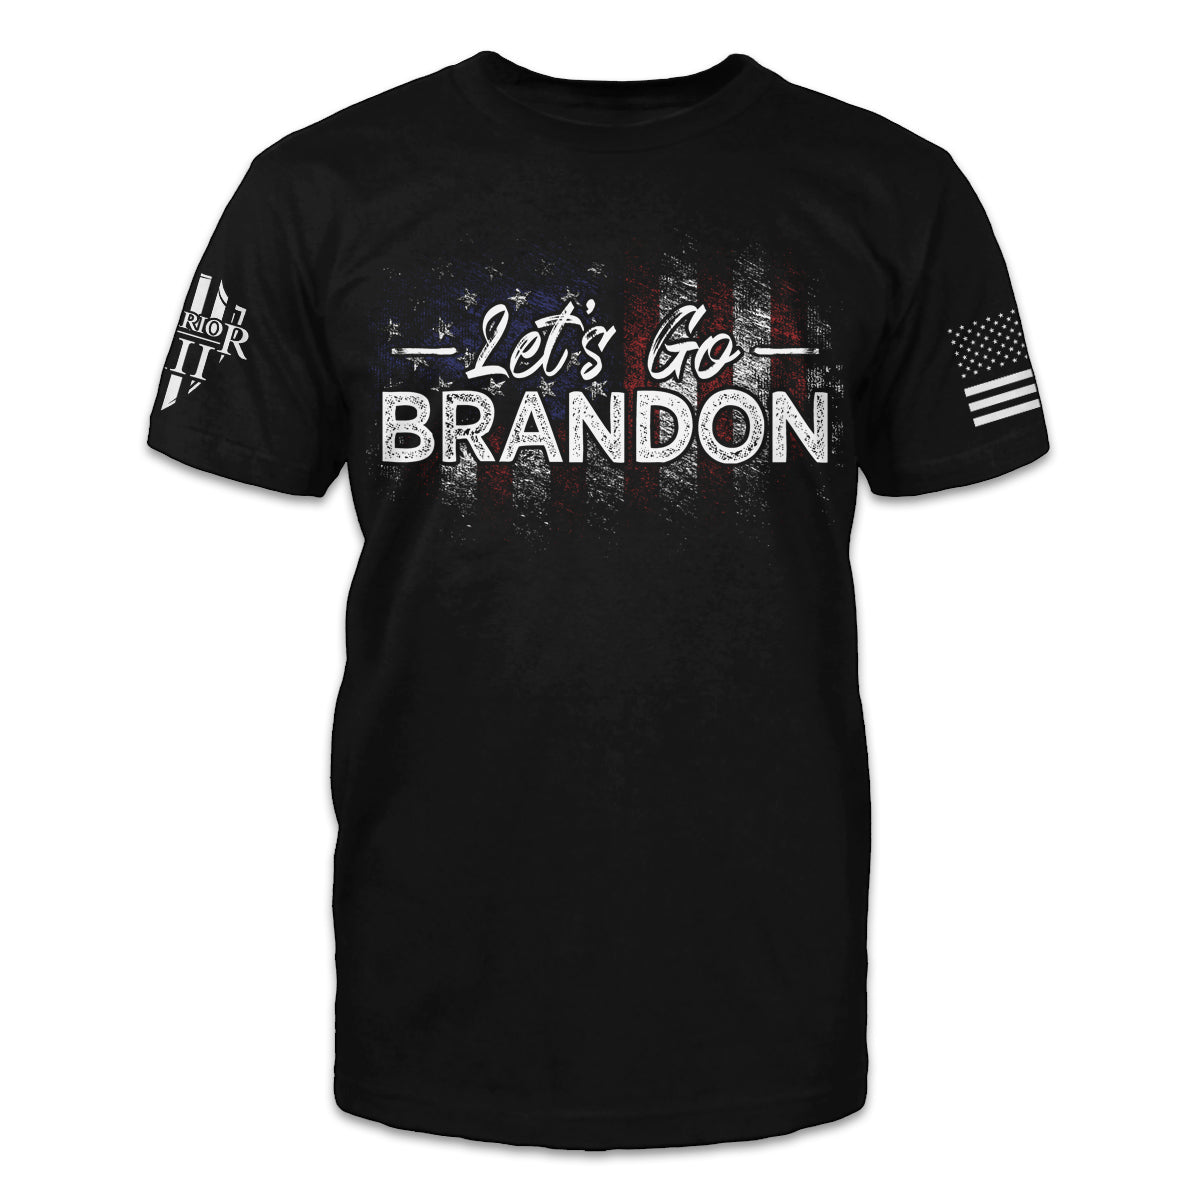 Michigan middle schoolers sue for right to wear 'Let's Go Brandon' gear